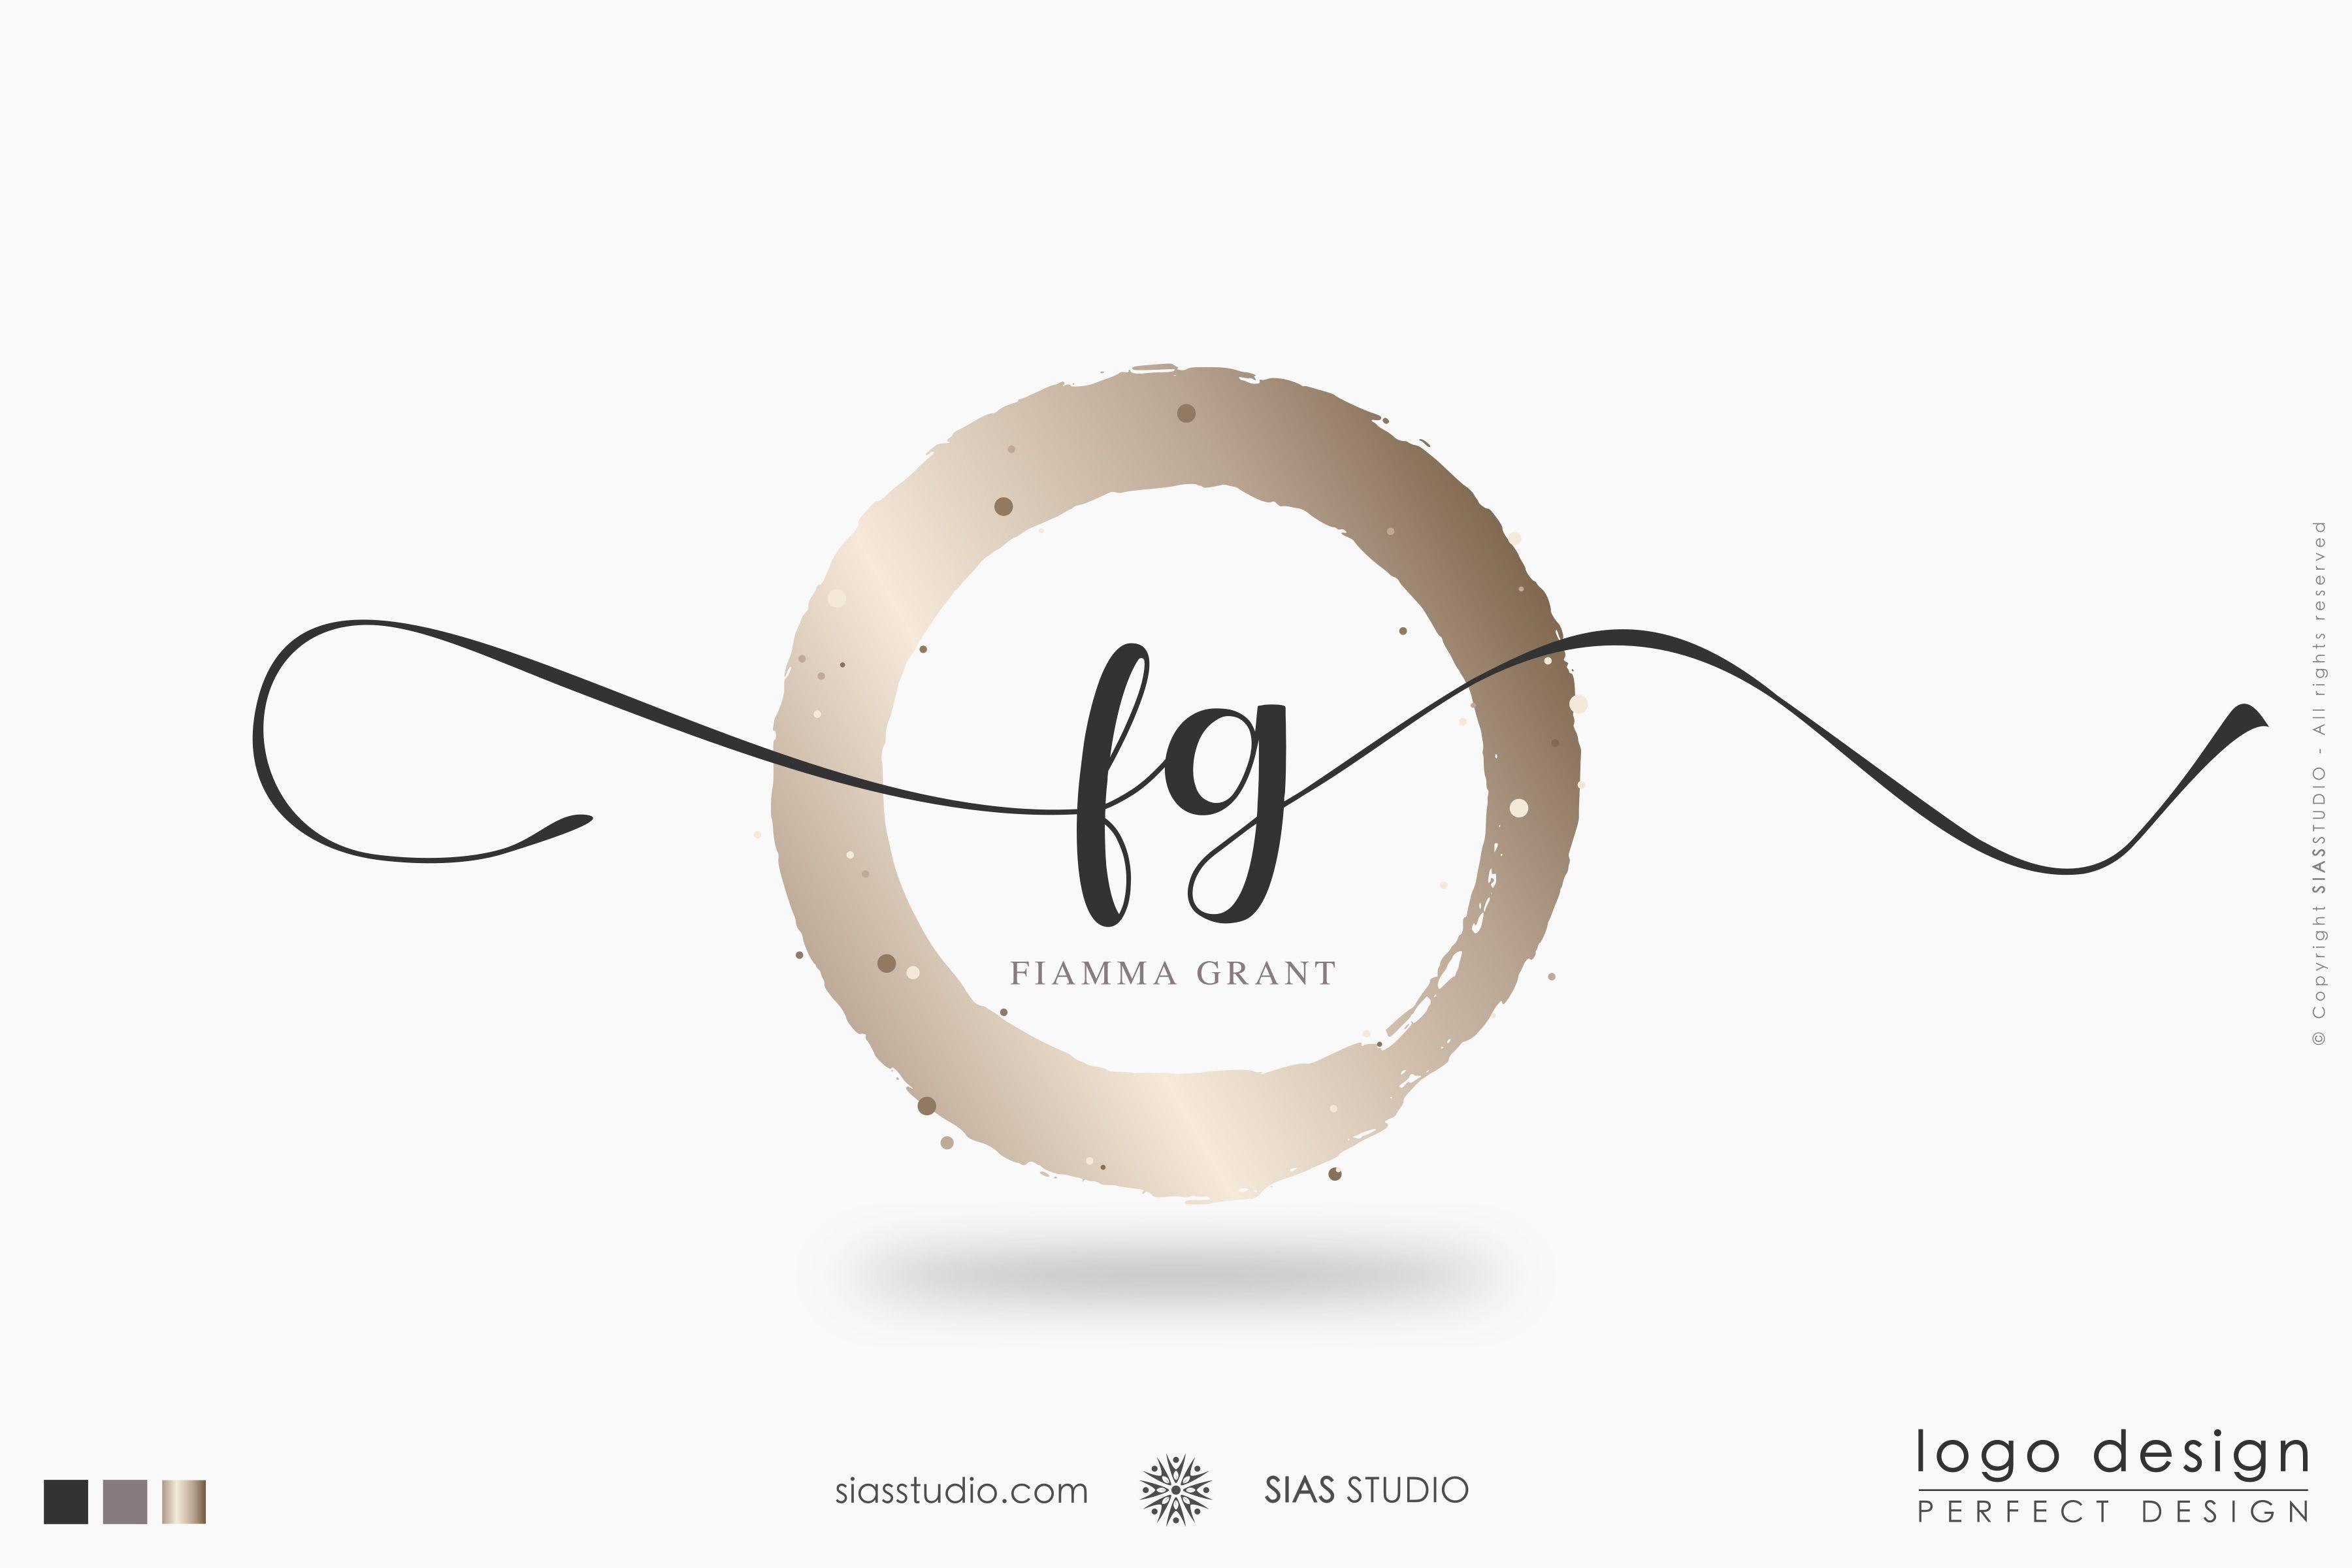 FG Logo - Logo design fg with gold effect circle and initials